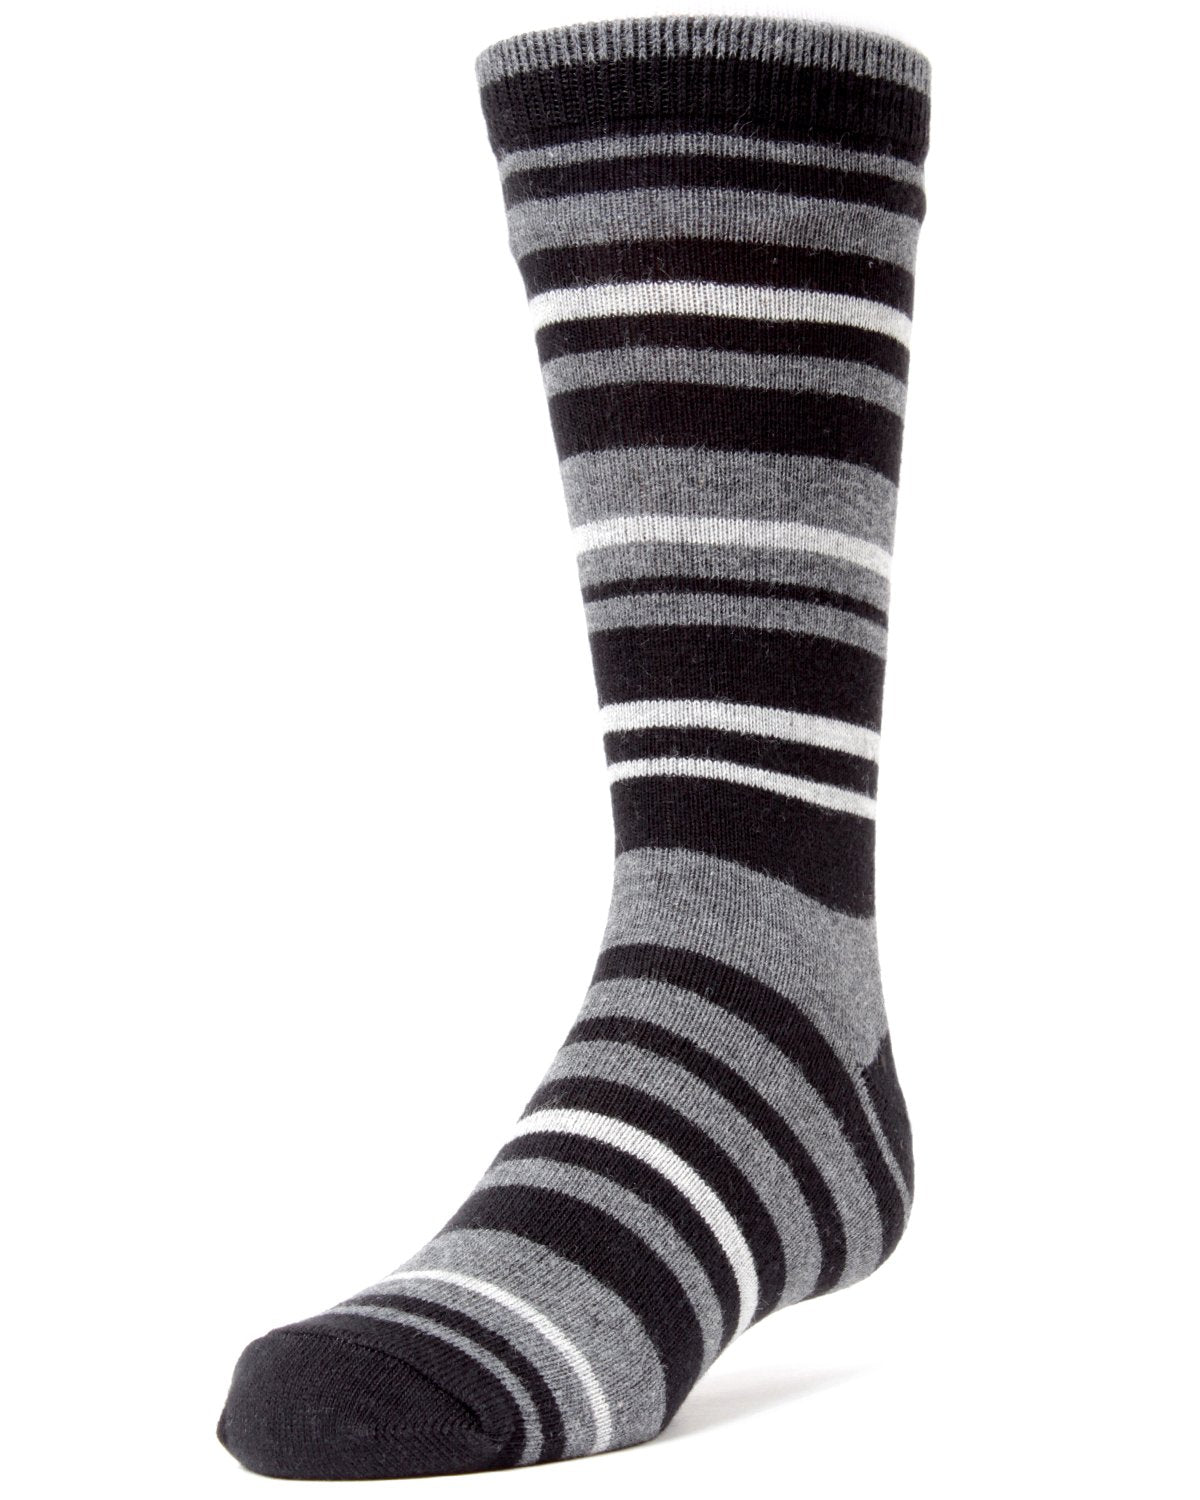 MeMoi Rings and Rungs Cotton Blend Striped Socks - Boys - Male - image 2 of 4